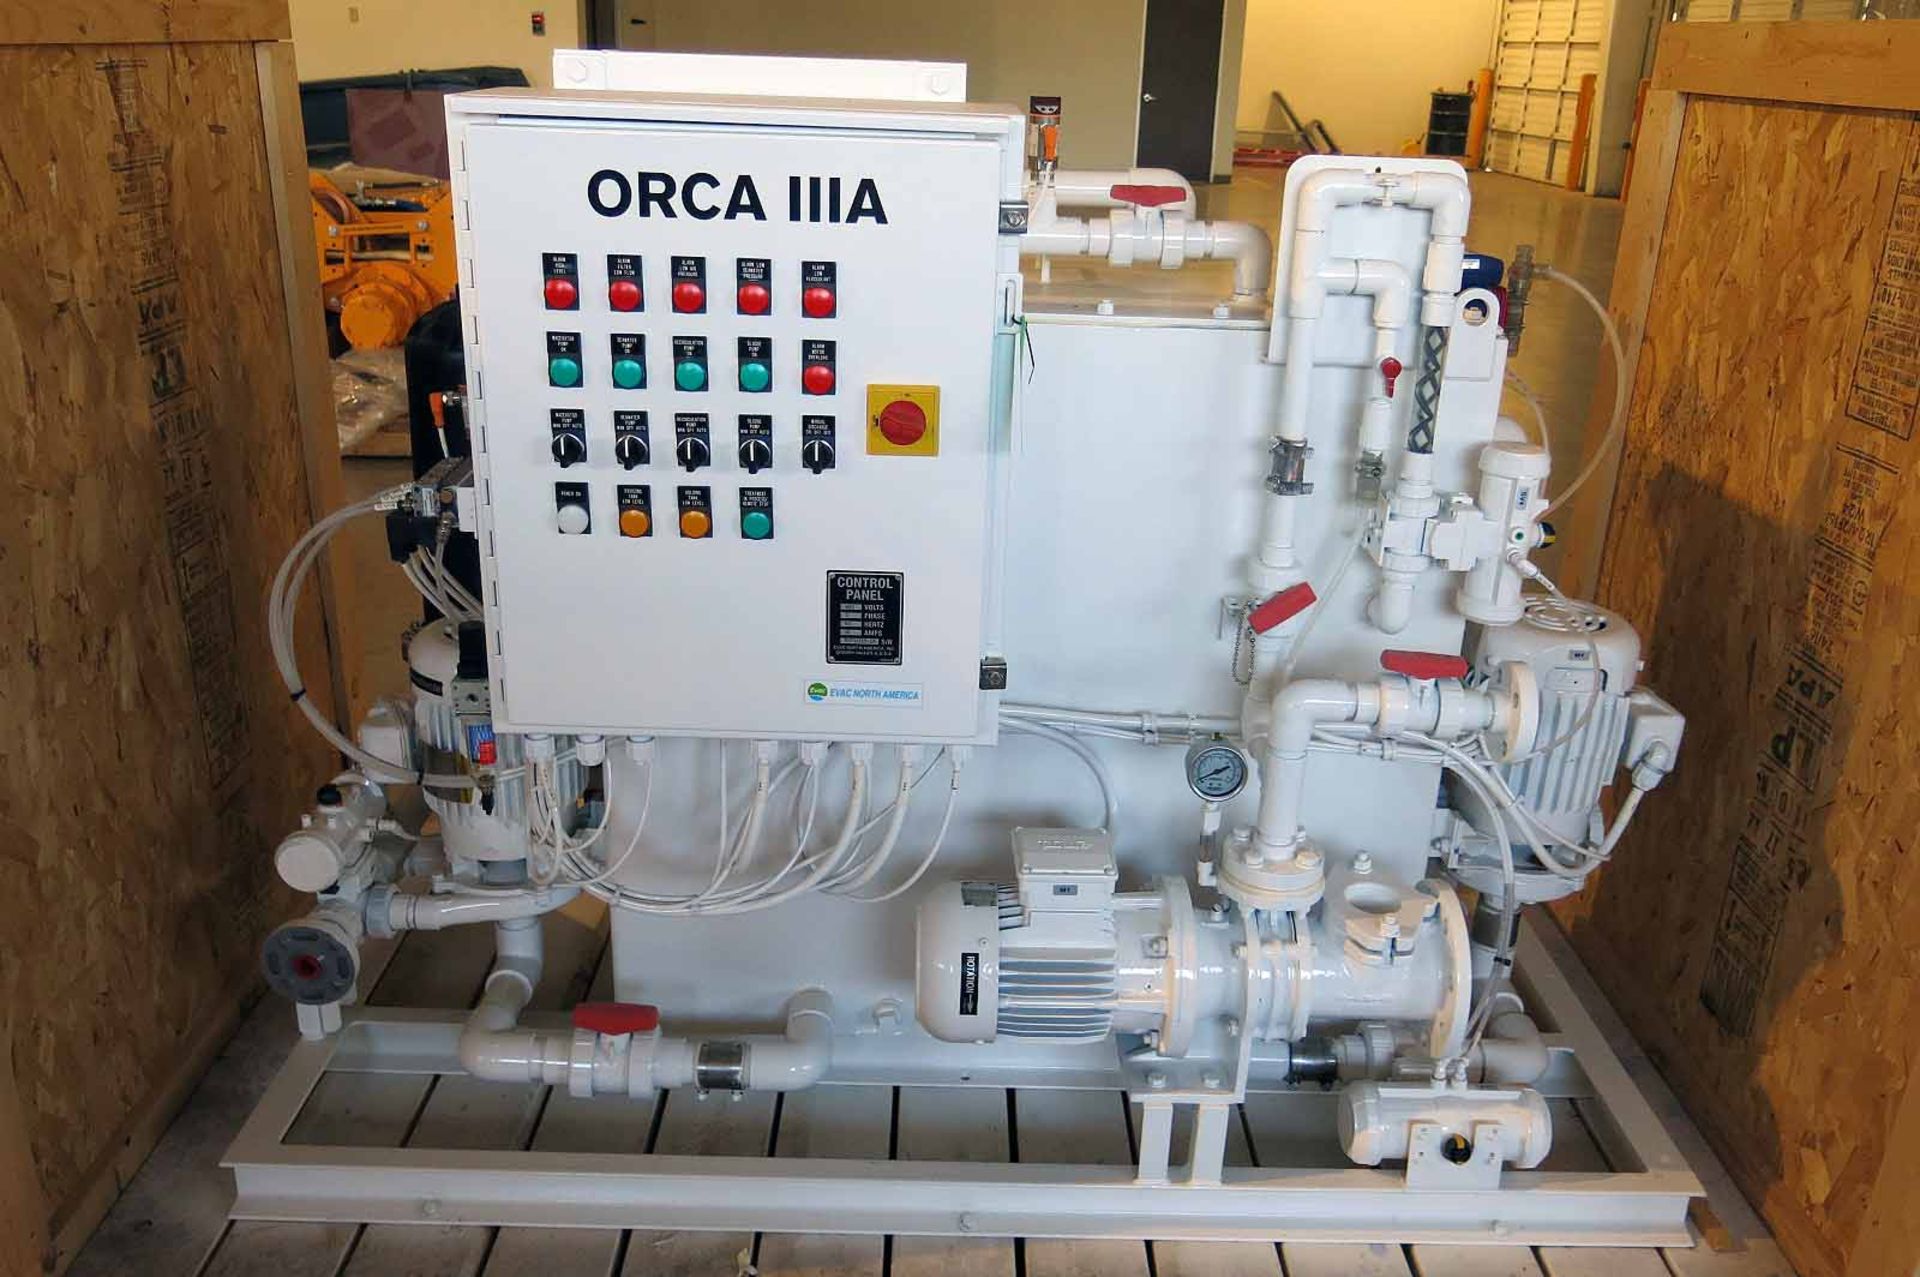 ONBOARD WASTEWATER TREATMENT PLANT, EVAC NORTH AMERICAN MDL. ORCA IIIA, unused, physiochemical - Image 4 of 6